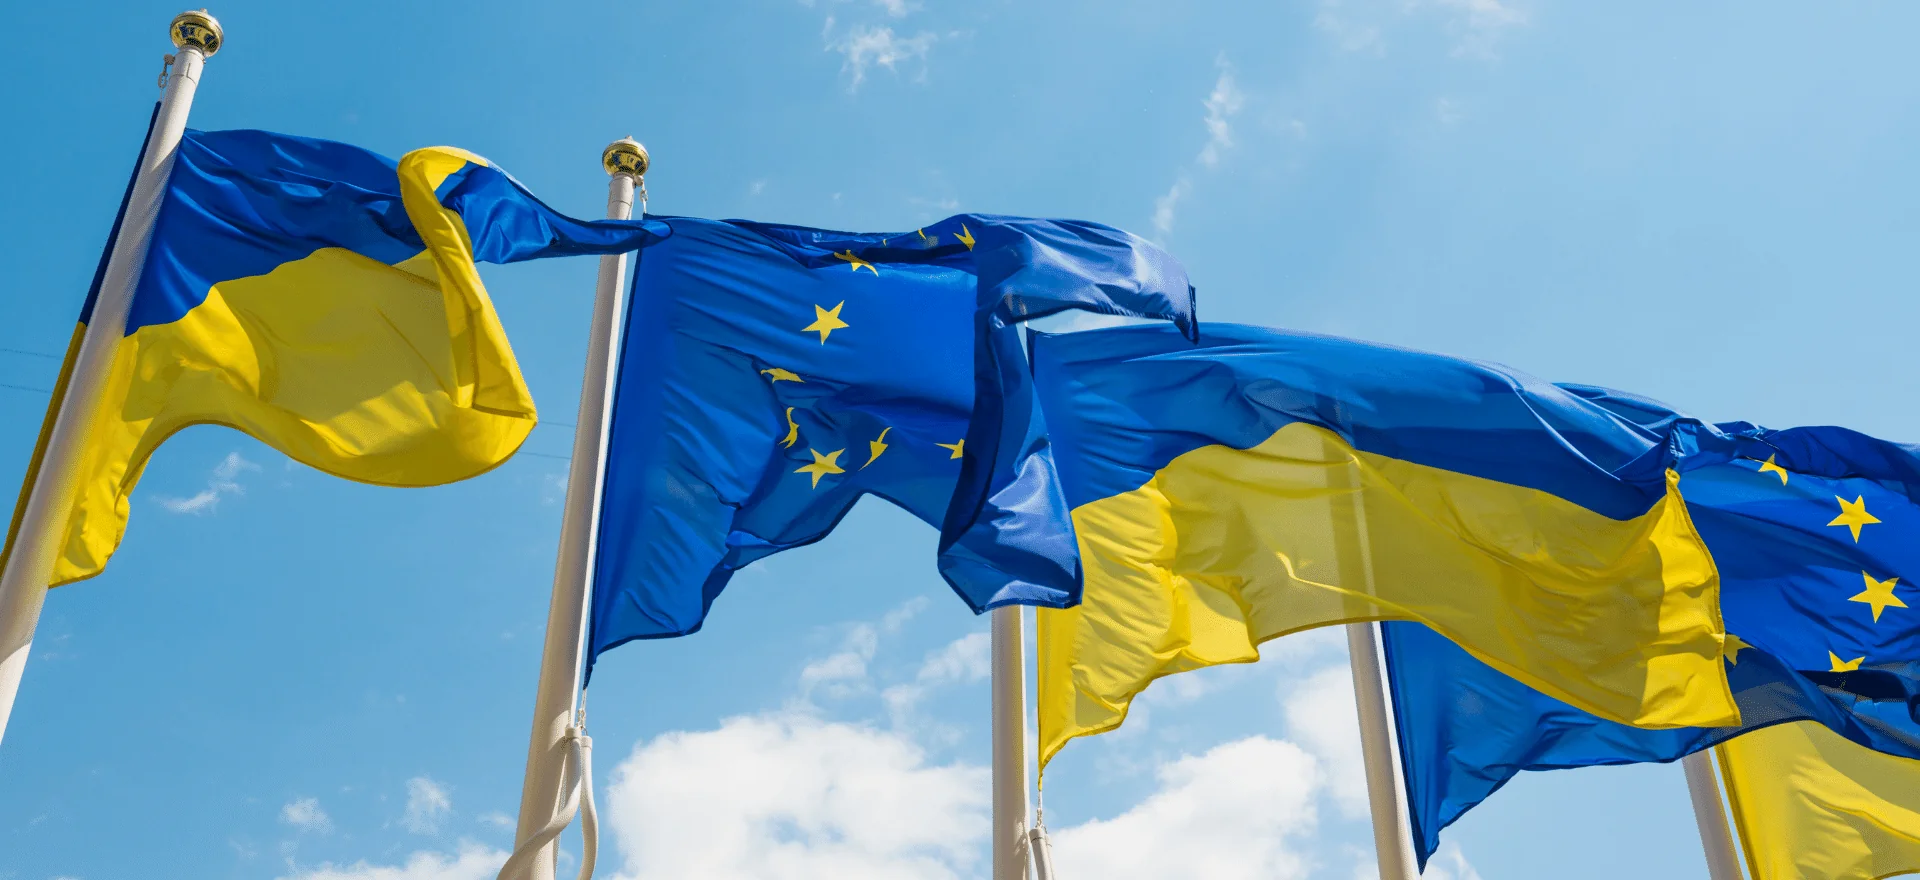 The Events industry unites in support for Ukraine